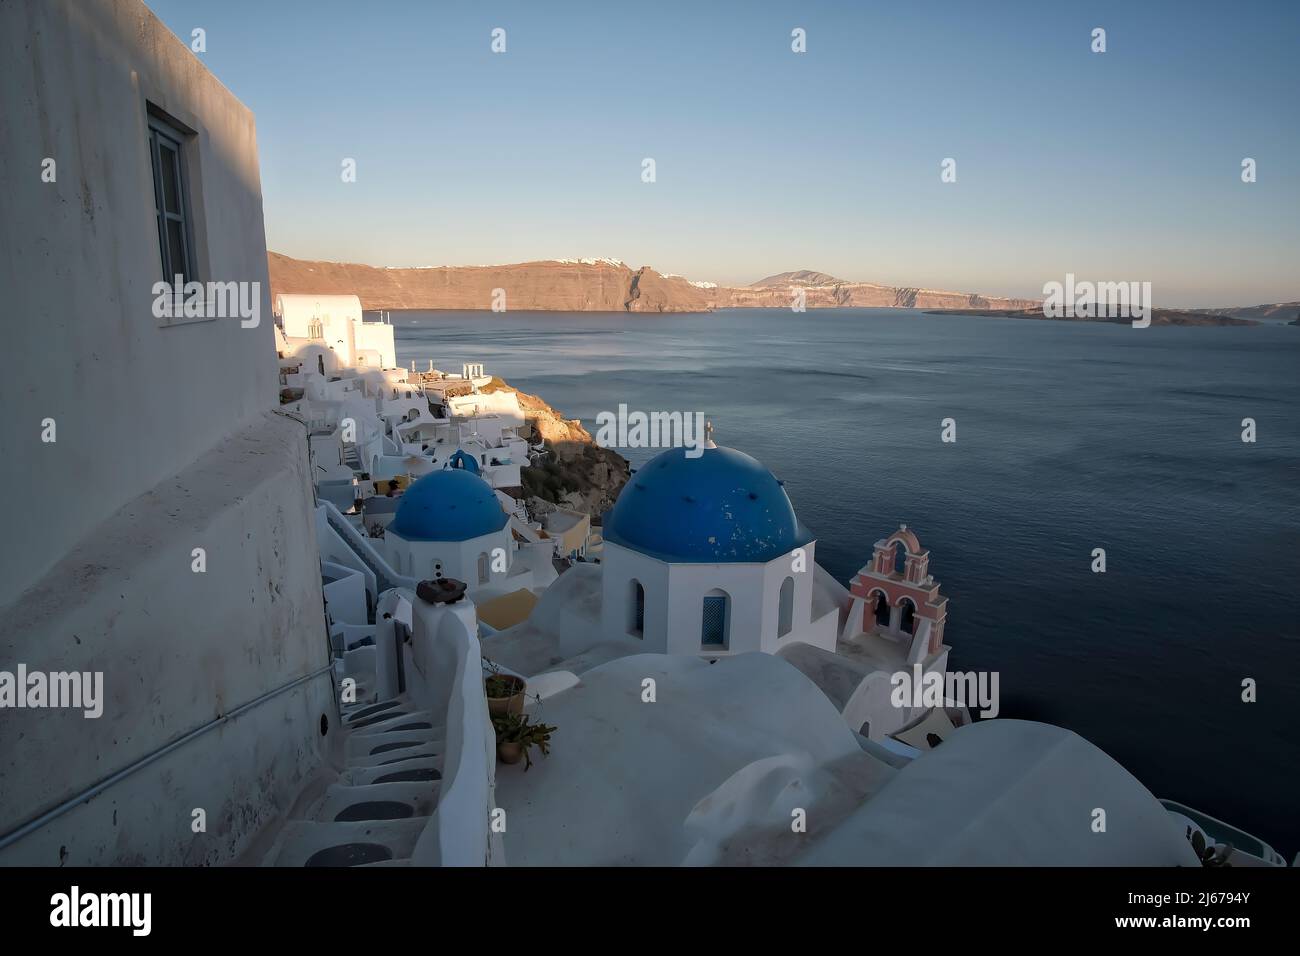 View of the whitewashed and picturesque small houses and hotels of Oia Santorini Stock Photo